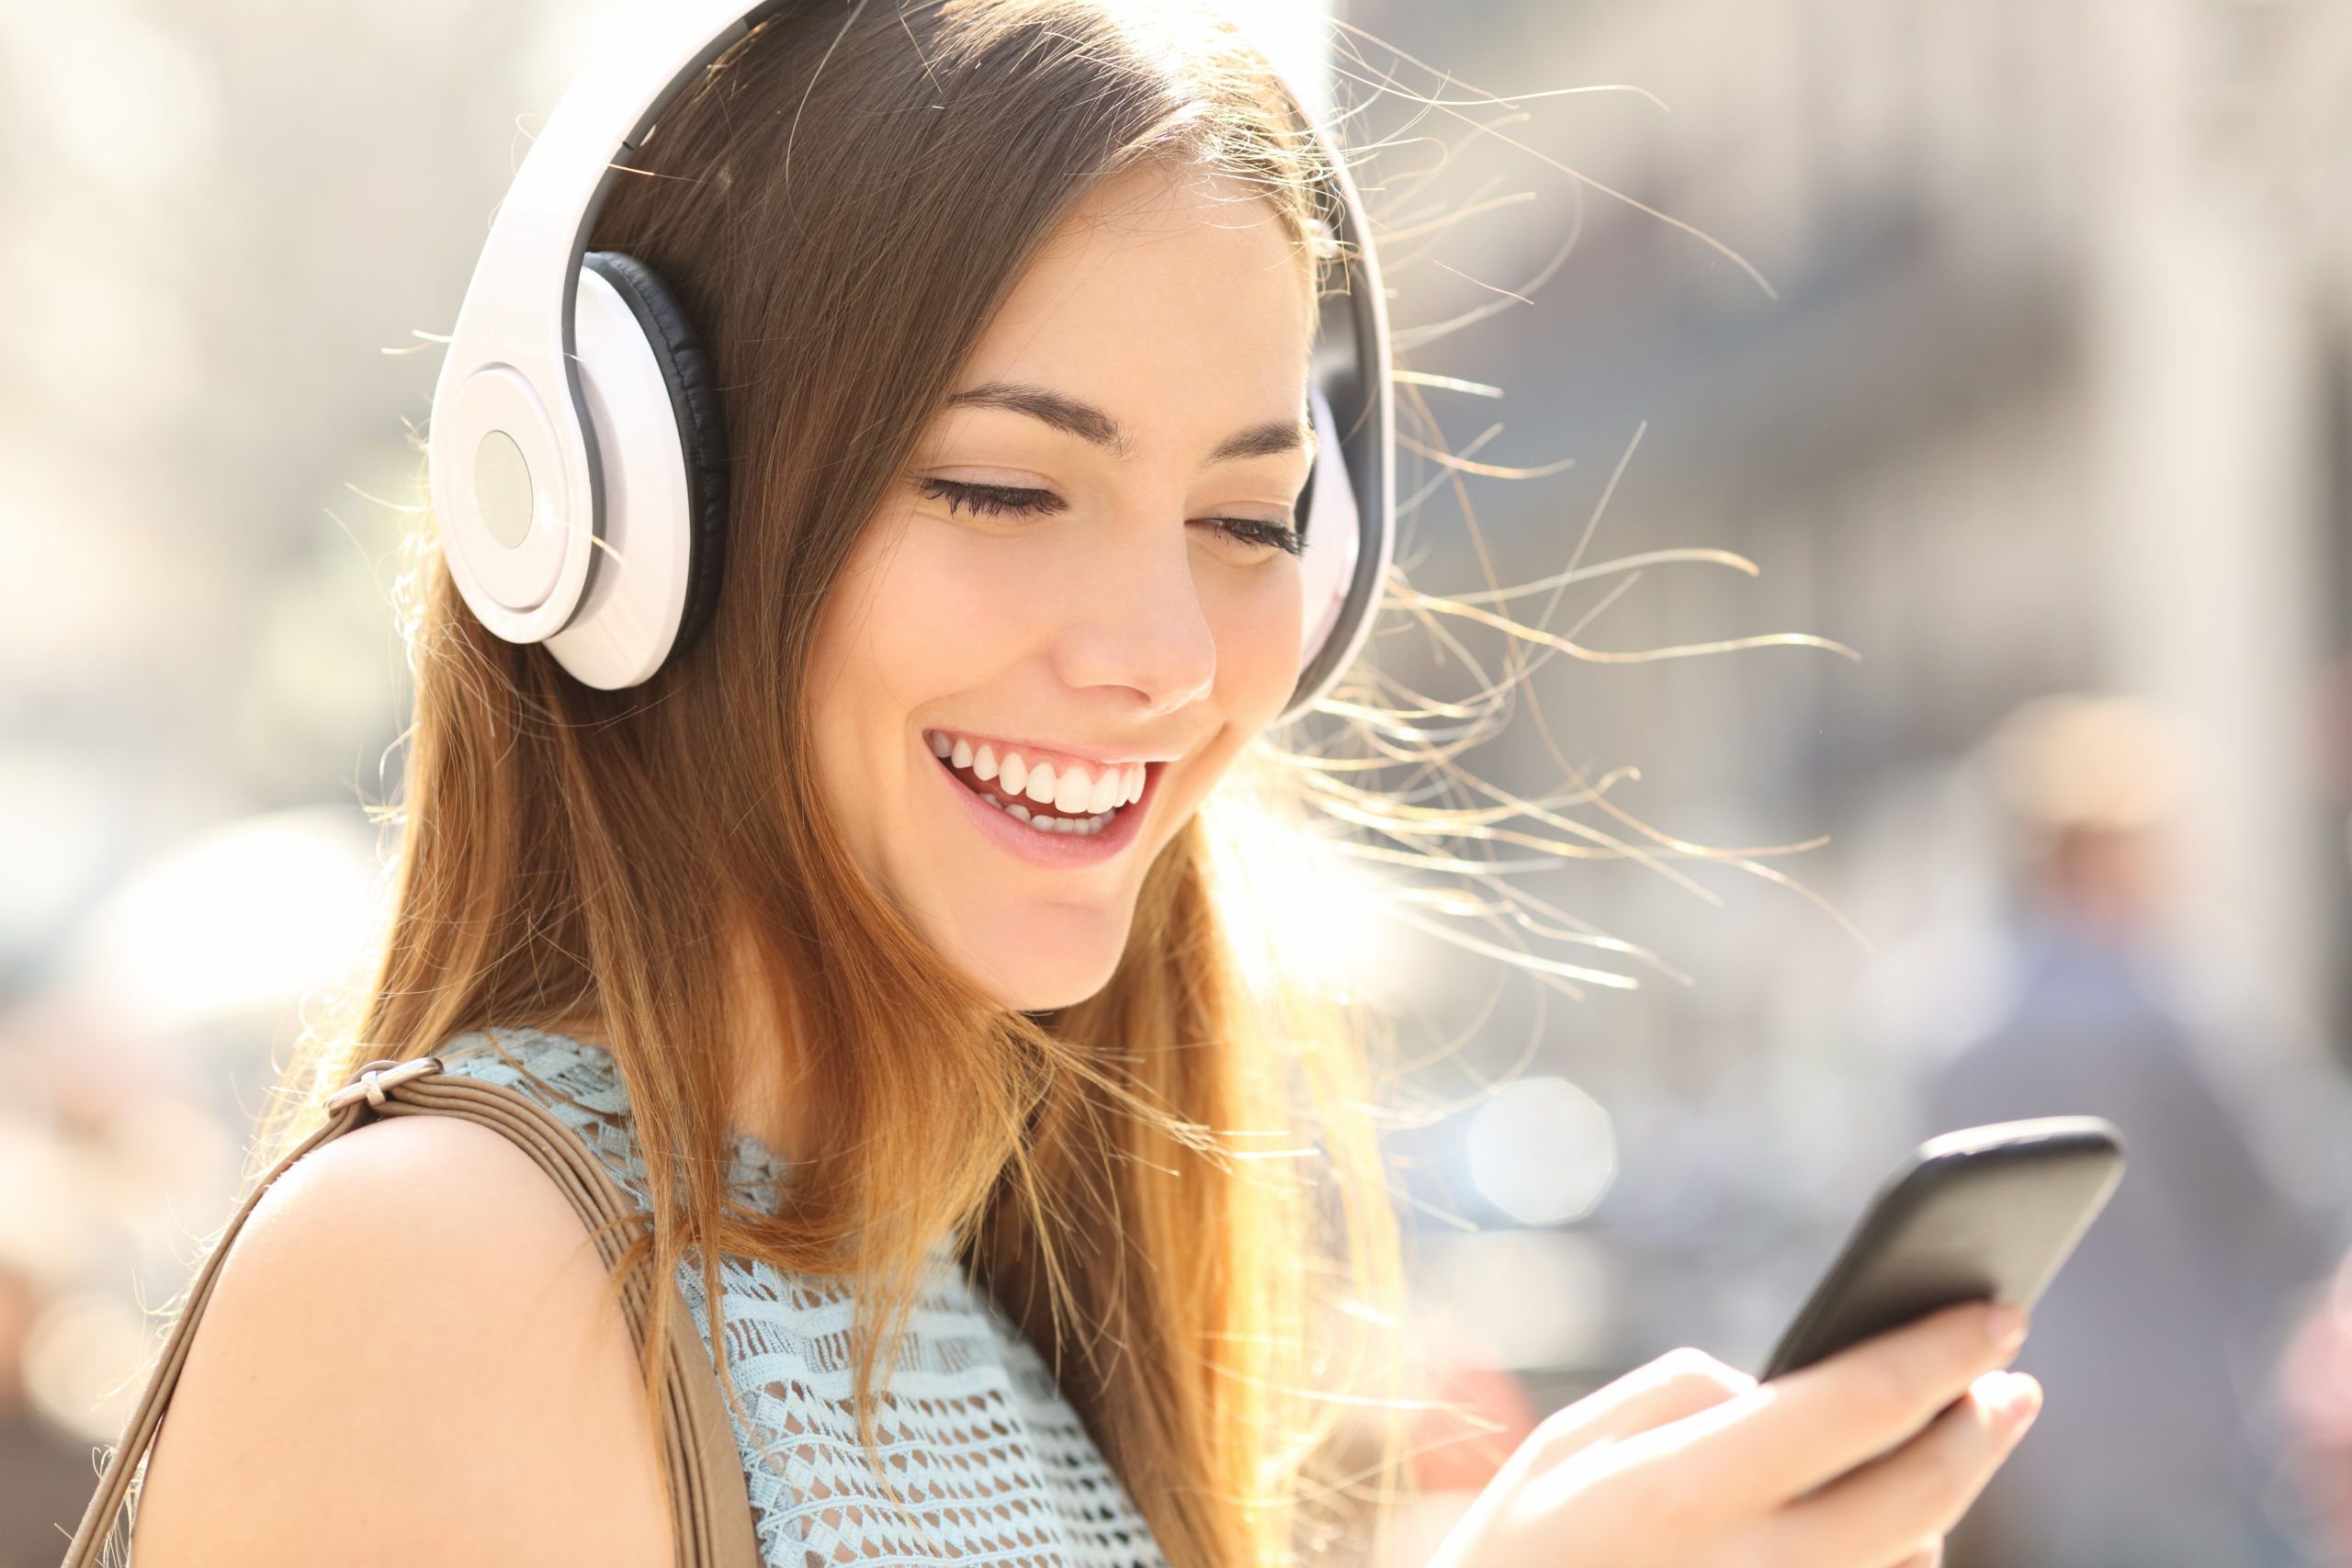 Portrait of a happy girl listening music on line with wireless headphones from a smartphone in the street in a summer sunny day